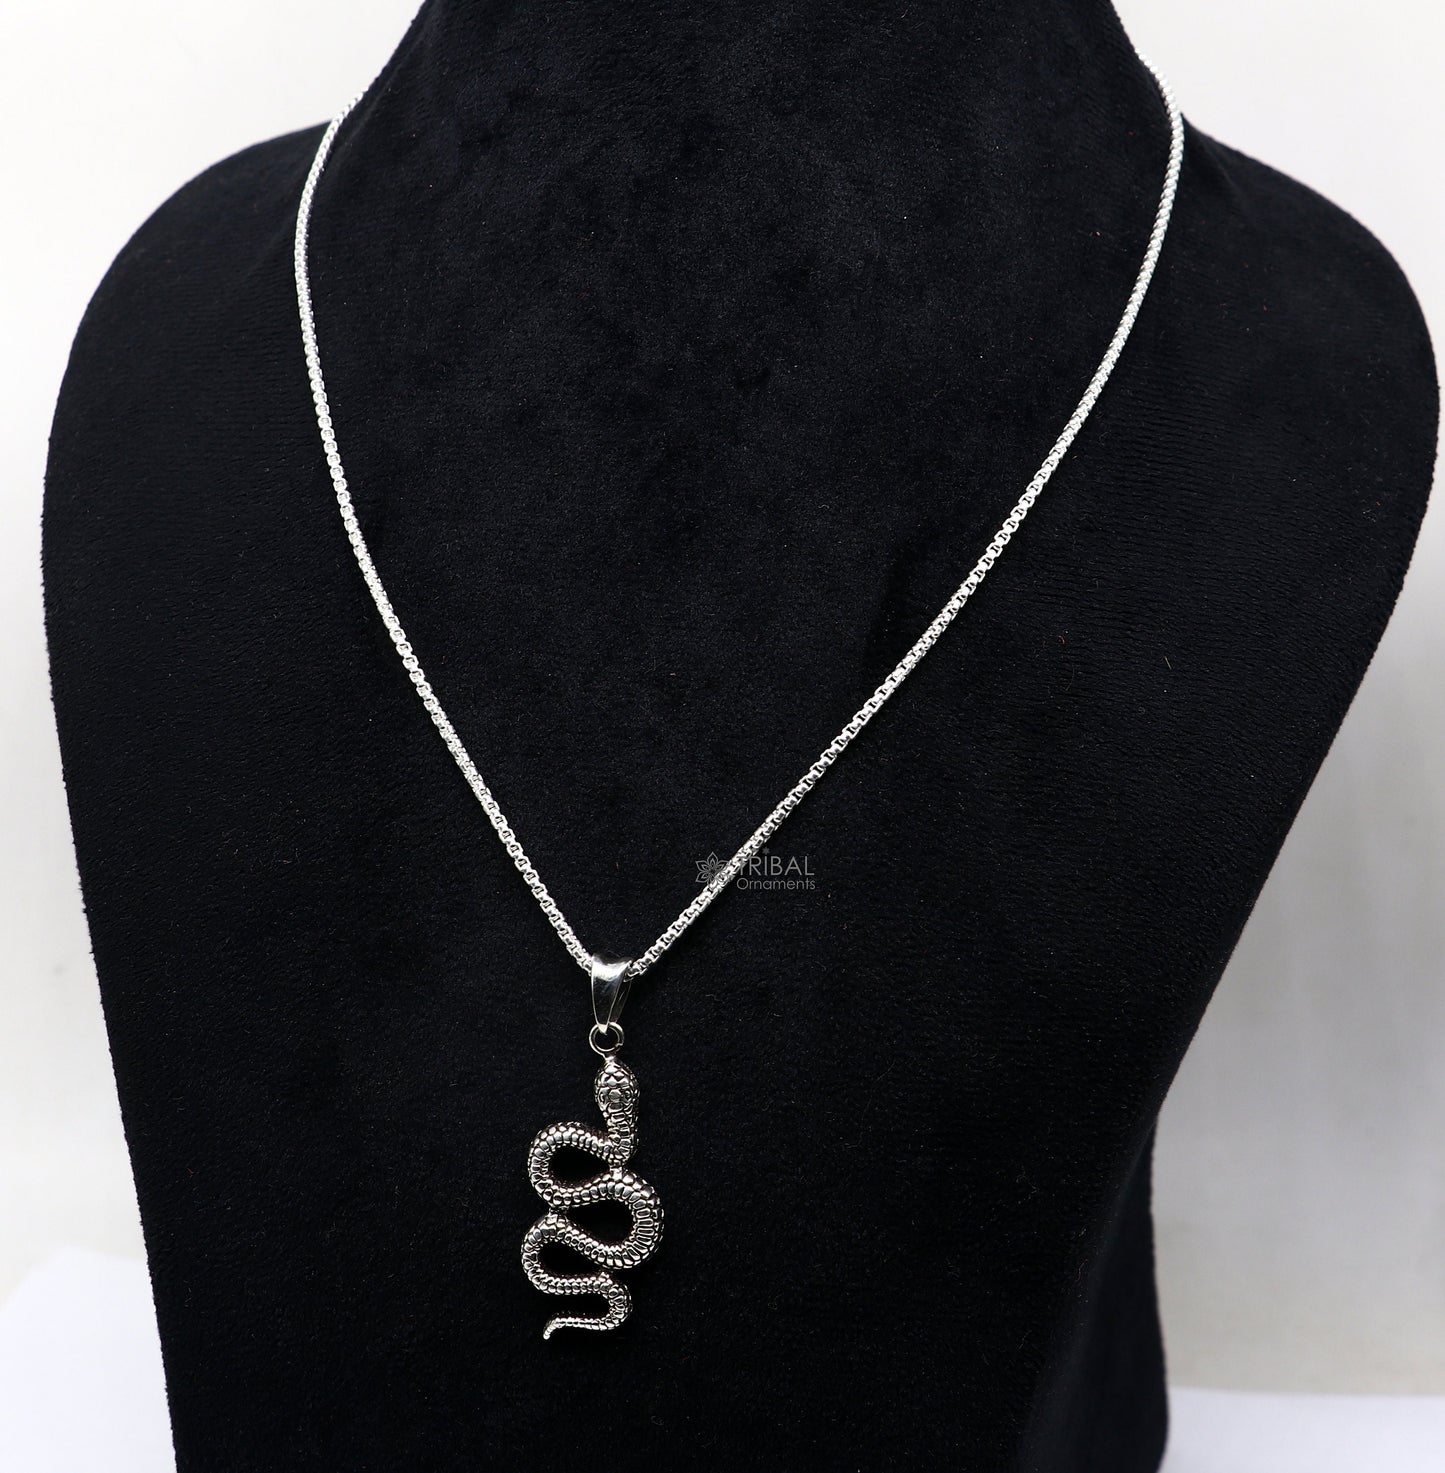 925 sterling silver unique waved snake pendant/ king cobra snake pendant is n embodiment of timeless beauty and symbolism nsp634 - TRIBAL ORNAMENTS